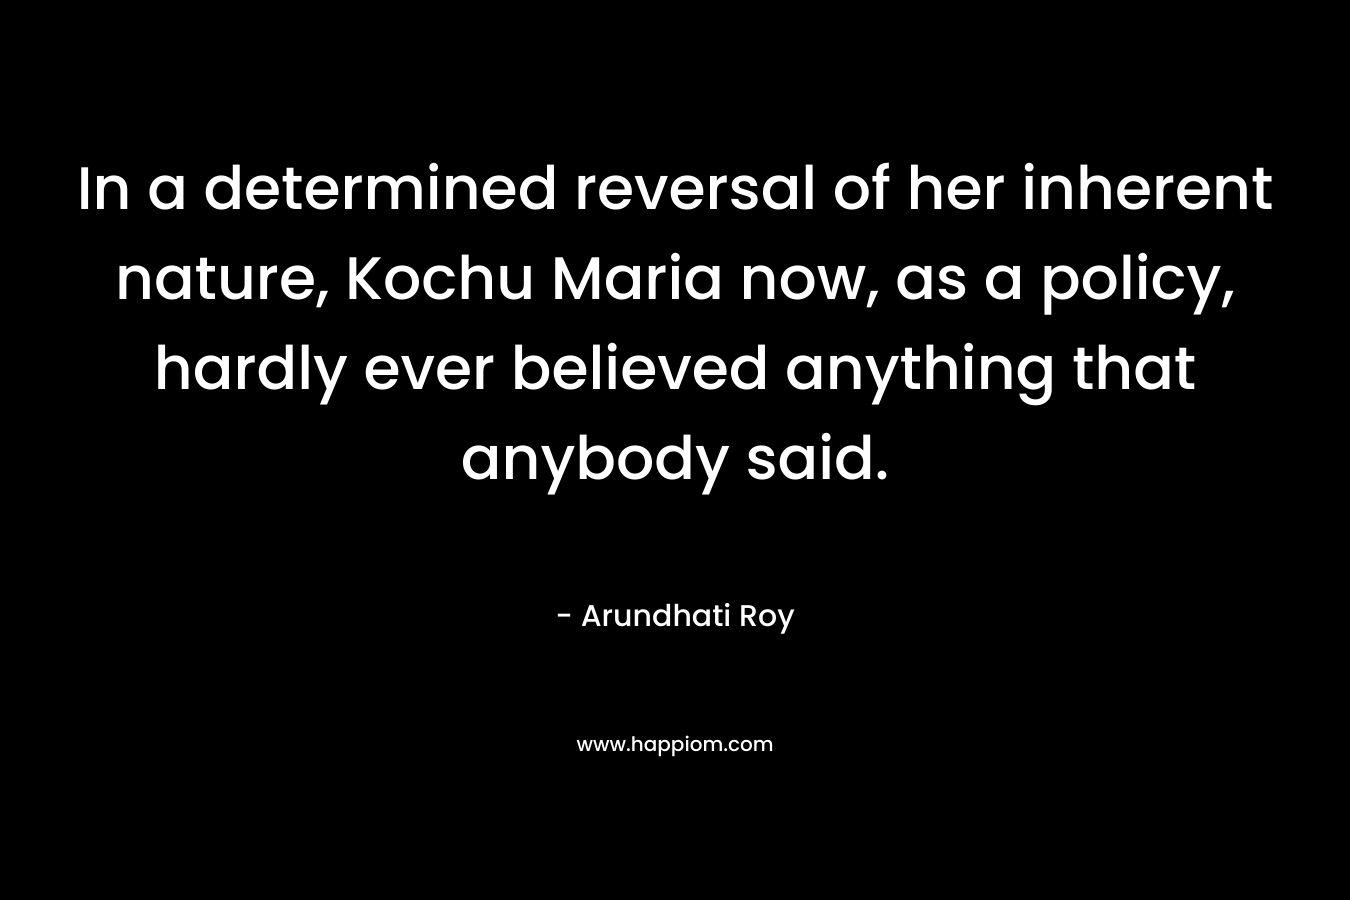 In a determined reversal of her inherent nature, Kochu Maria now, as a policy, hardly ever believed anything that anybody said. – Arundhati Roy